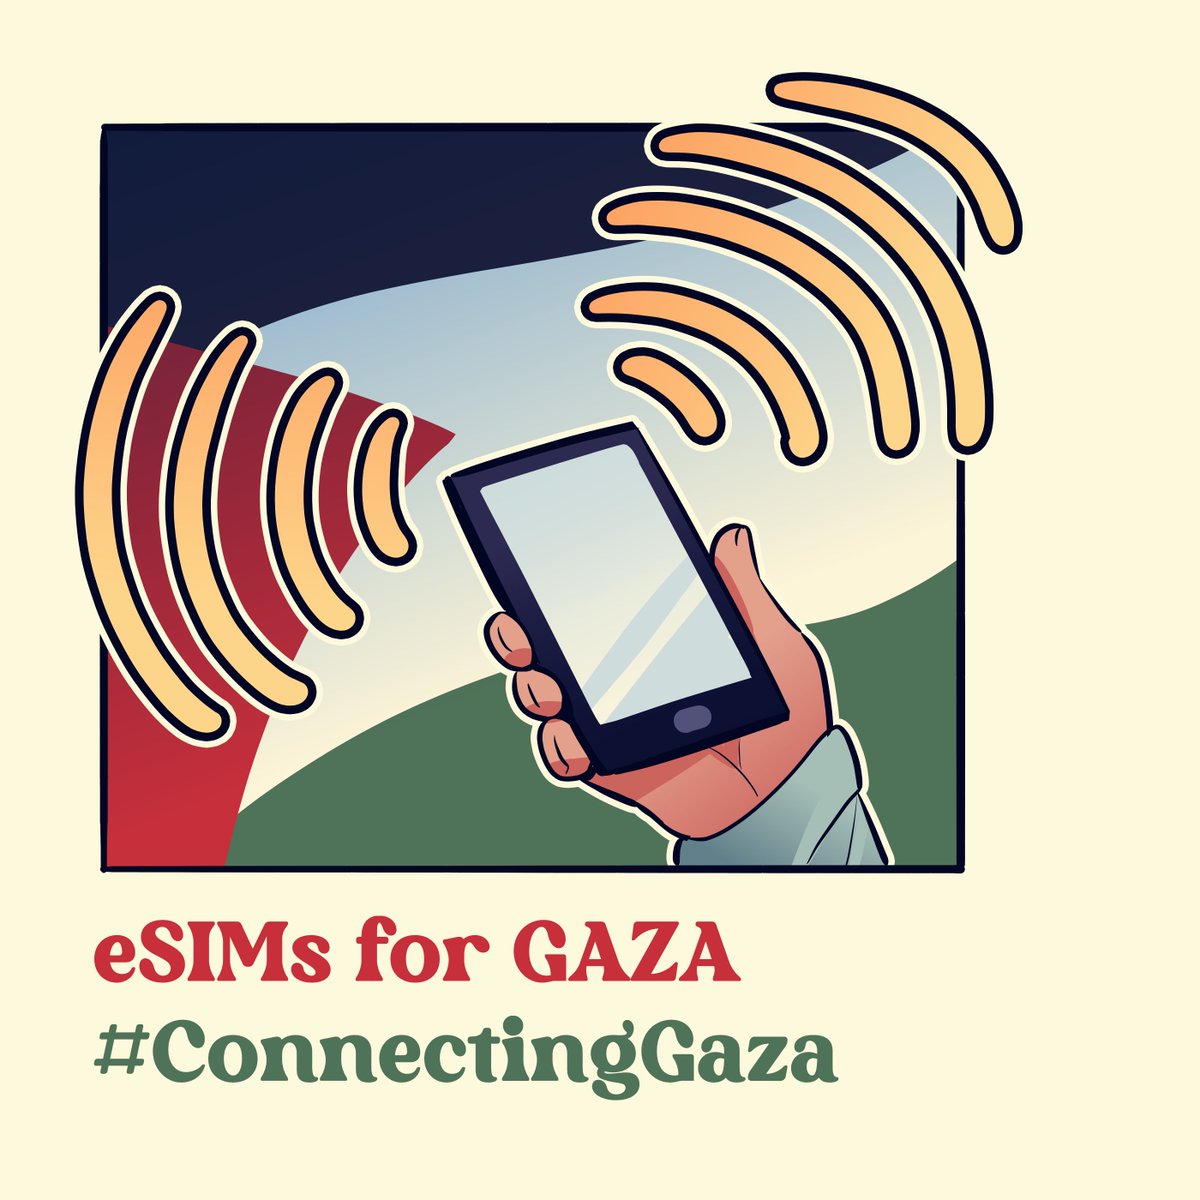 Informations on how you can keep Gaza connected with the internet are put below this tweet! #CeasefireNOW #ConnectingGaza #FreePalestine